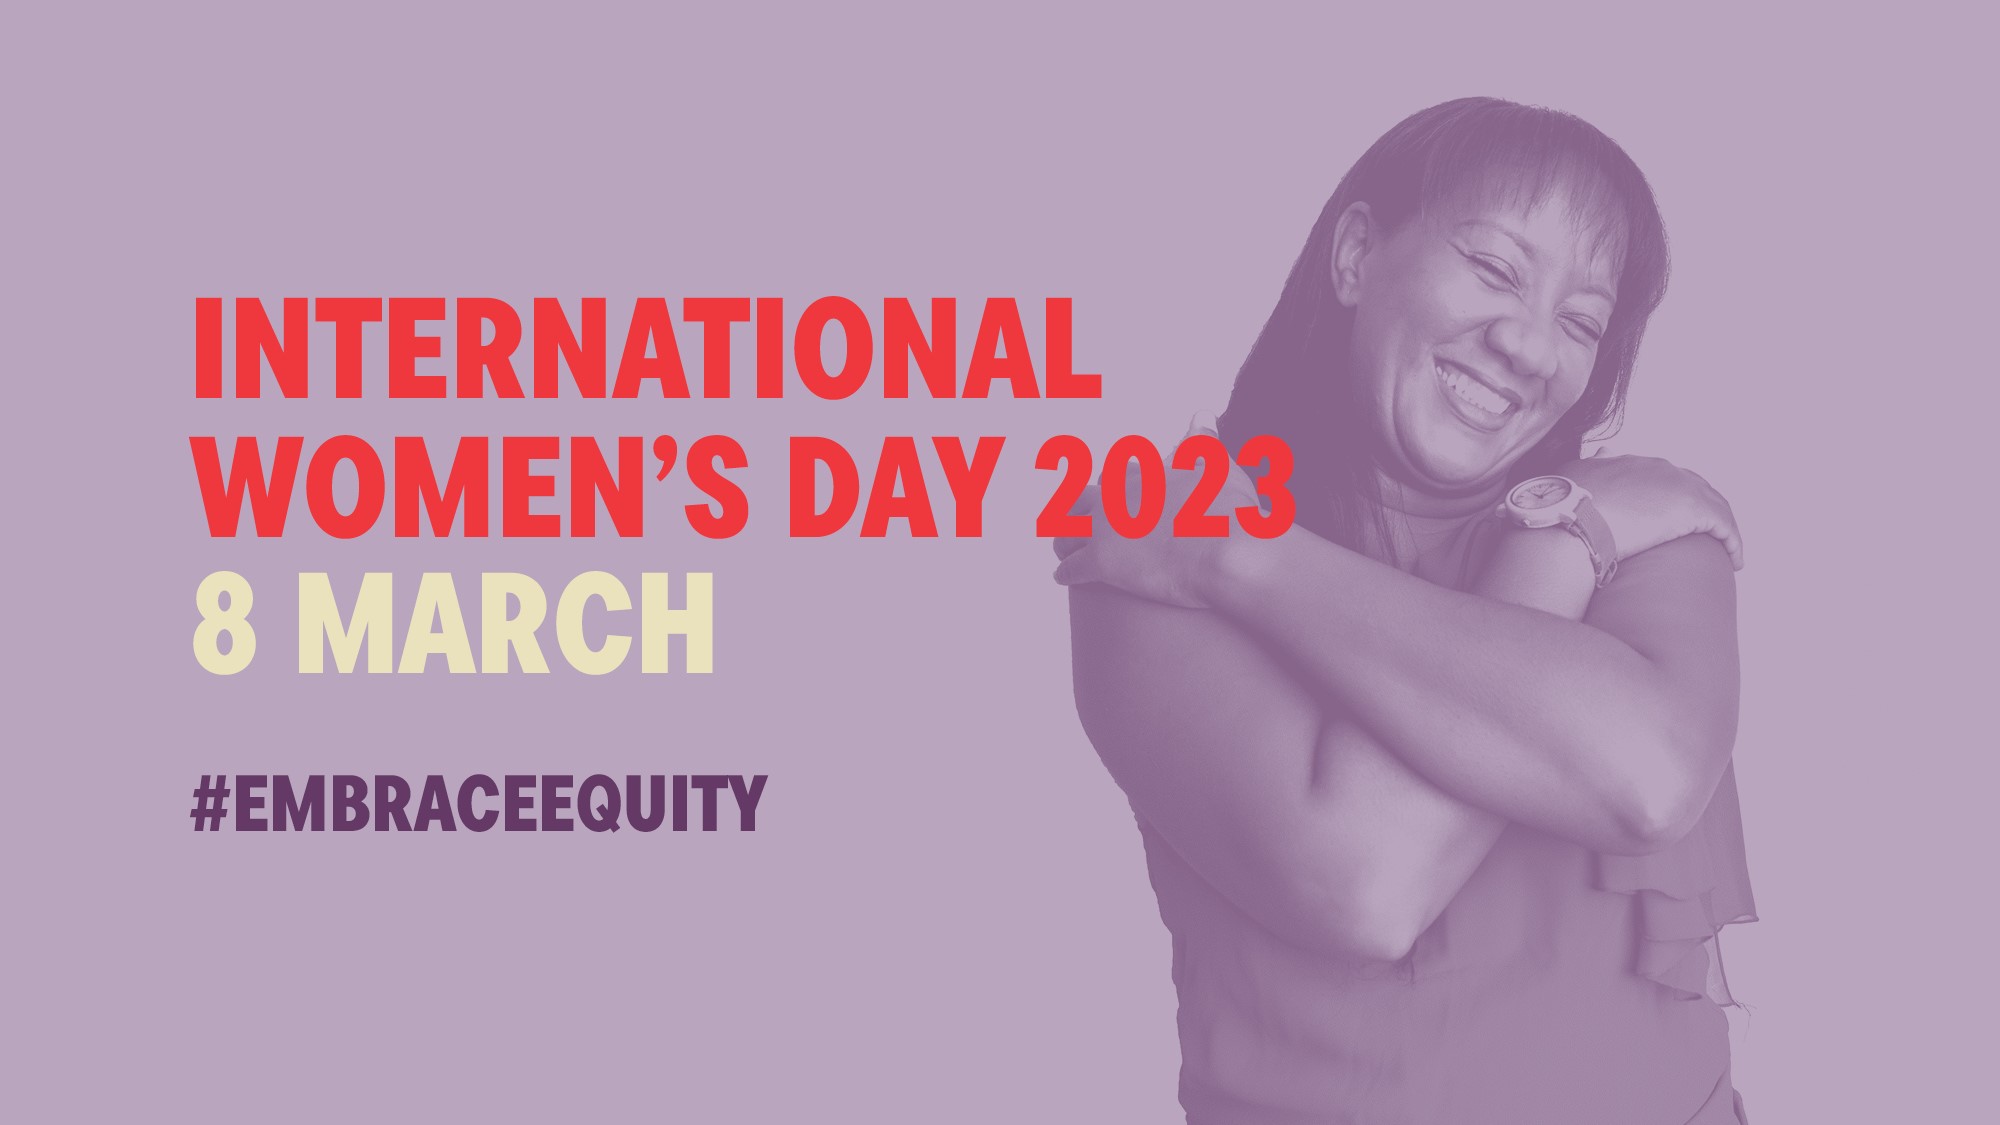 International Women's Day 2023 sees Mars support women flipping the status  quo